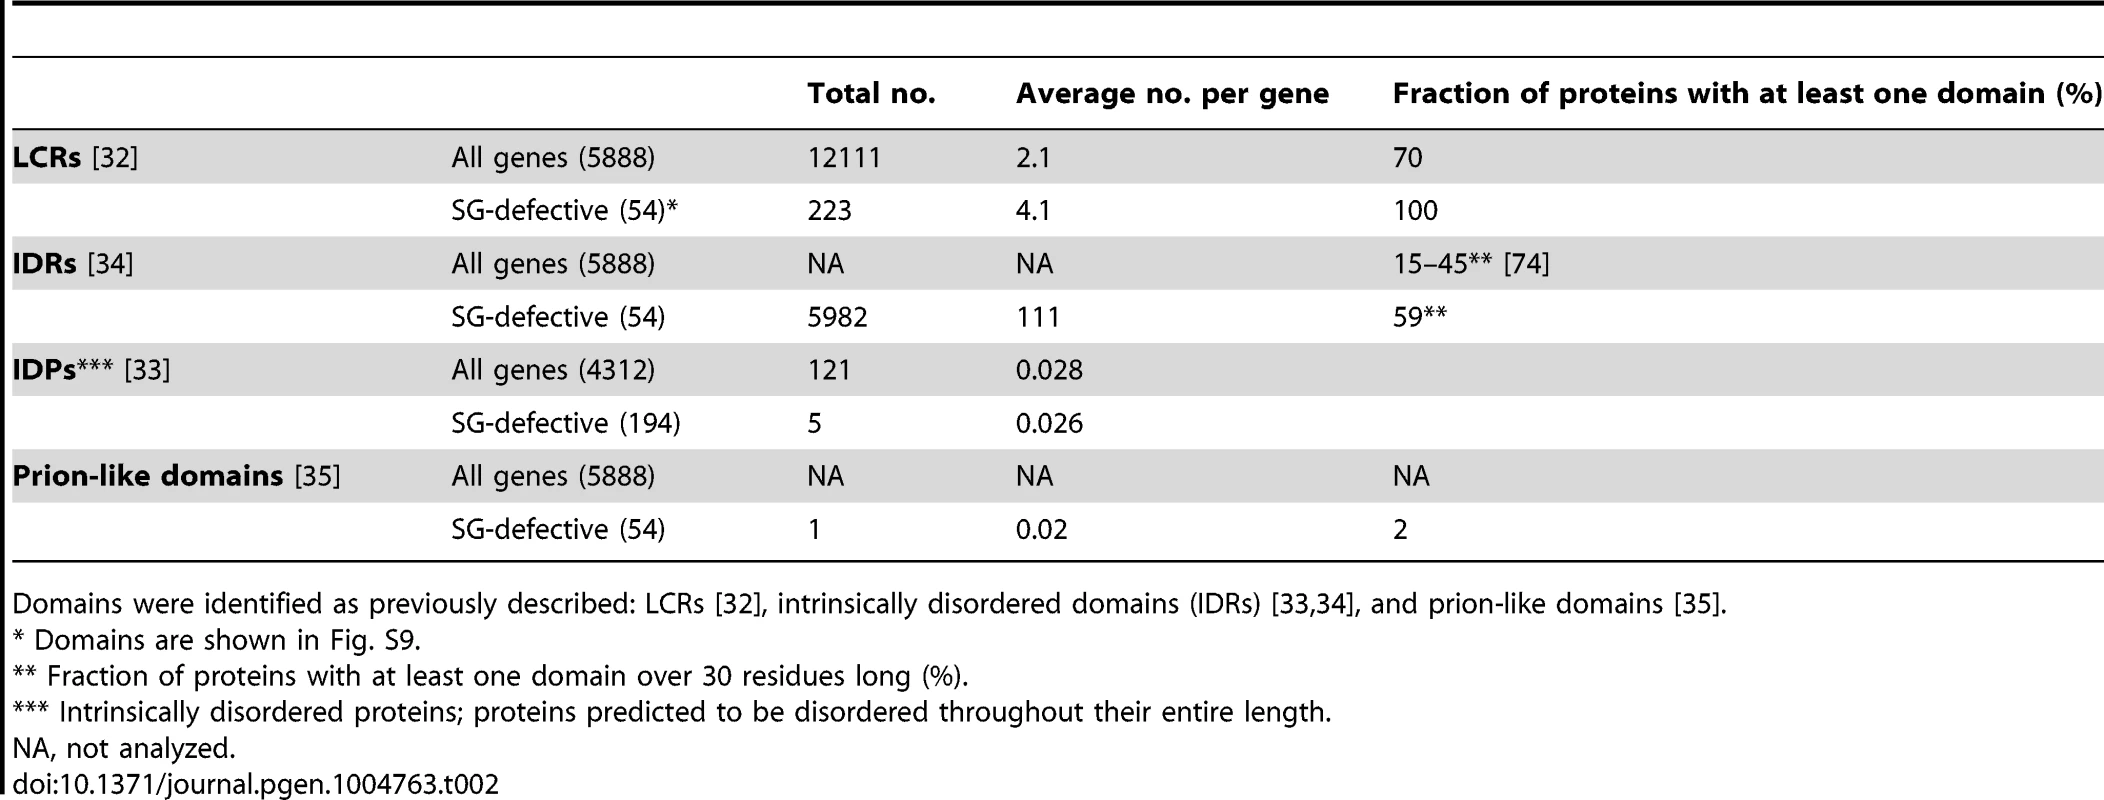 Occurrence of low-complexity regions (LCRs), intrinsically disordered domains (IDRs), disordered binding domains, and prion-like domains among proteins associated with strong SG-defective phenotypes.